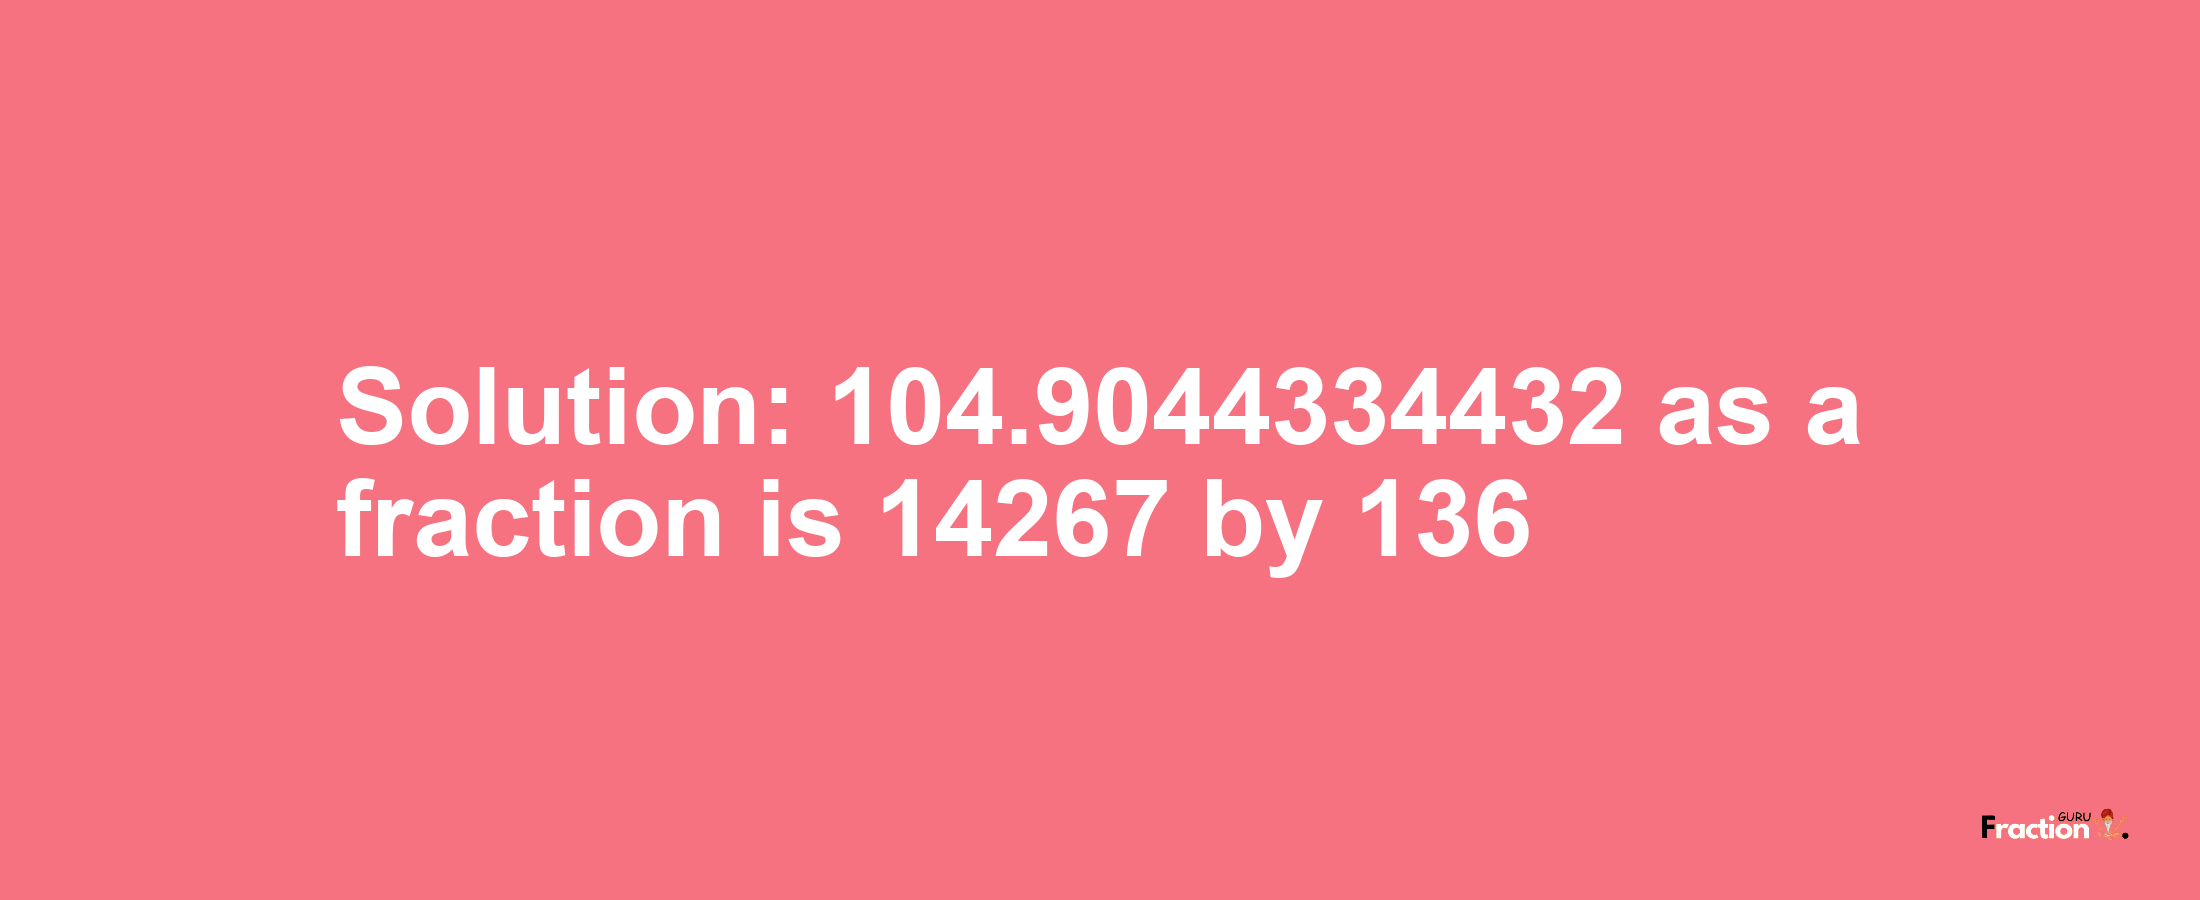 Solution:104.9044334432 as a fraction is 14267/136